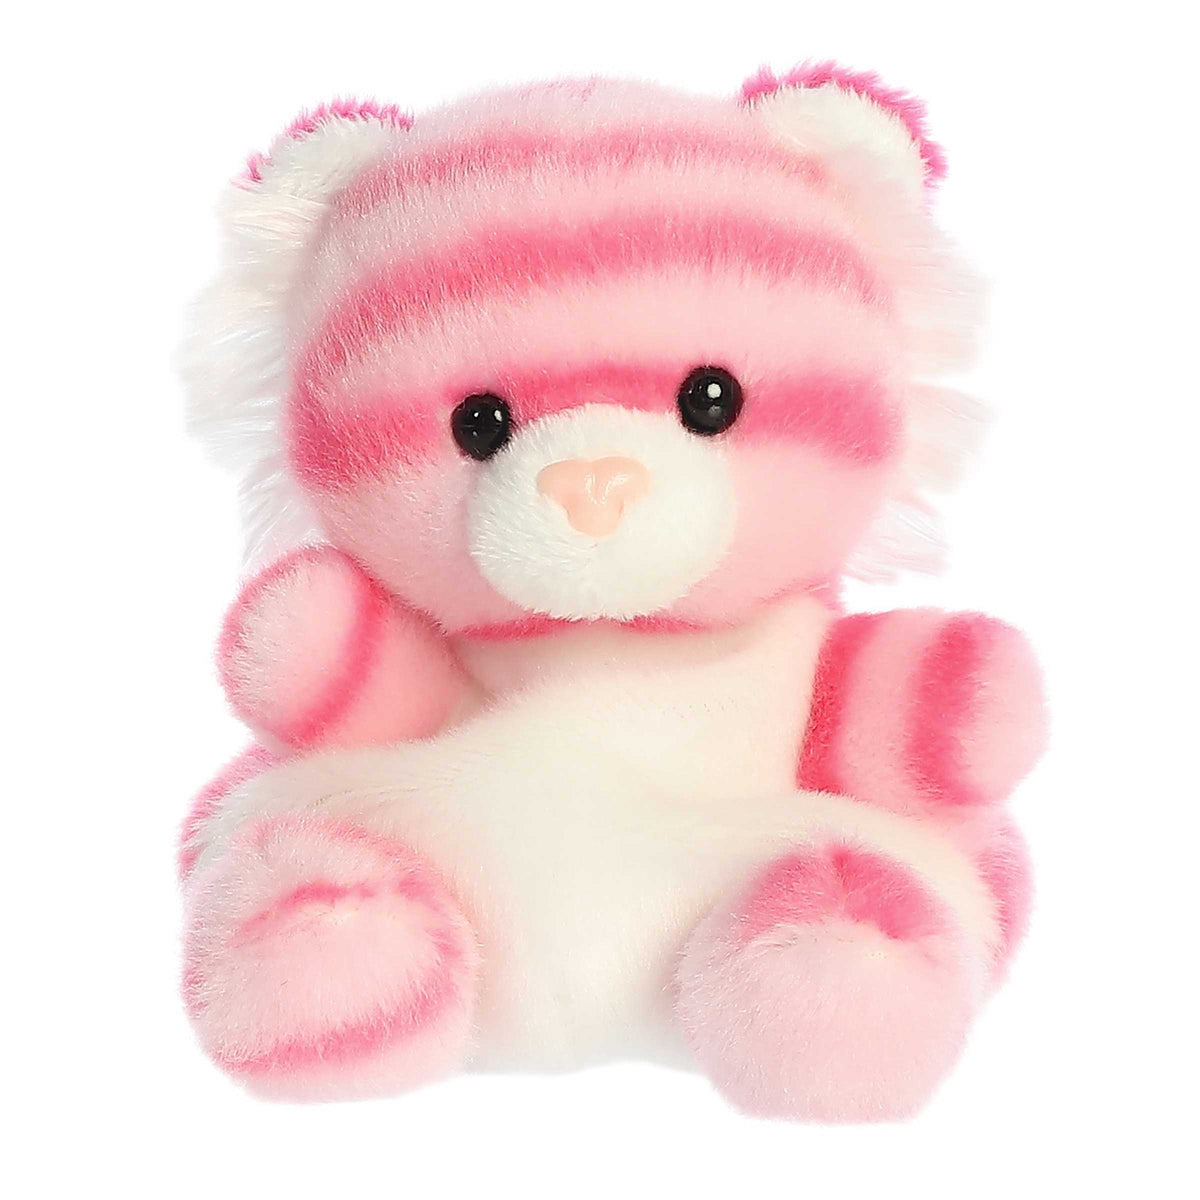 Adorable cuddly tiger plush toy with light pink mini body, dark pink stripes, and white fur accents around mouth and ears